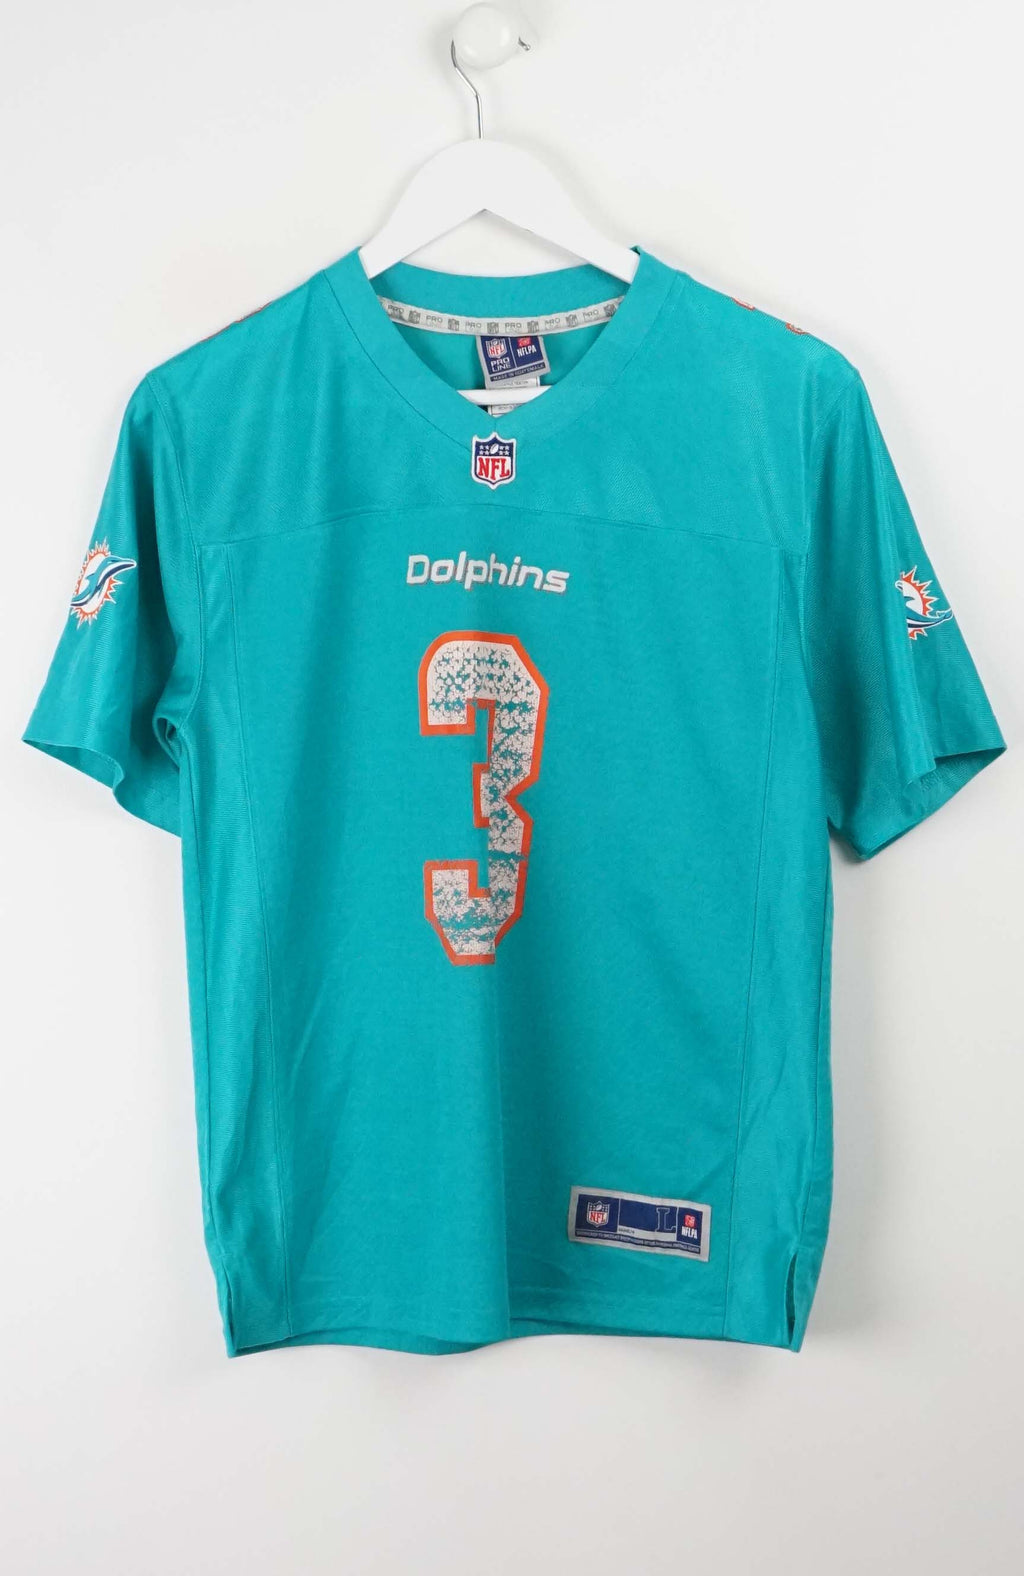 VINTAGE NFL MIAMI DOLPHINS JERSEY (S)